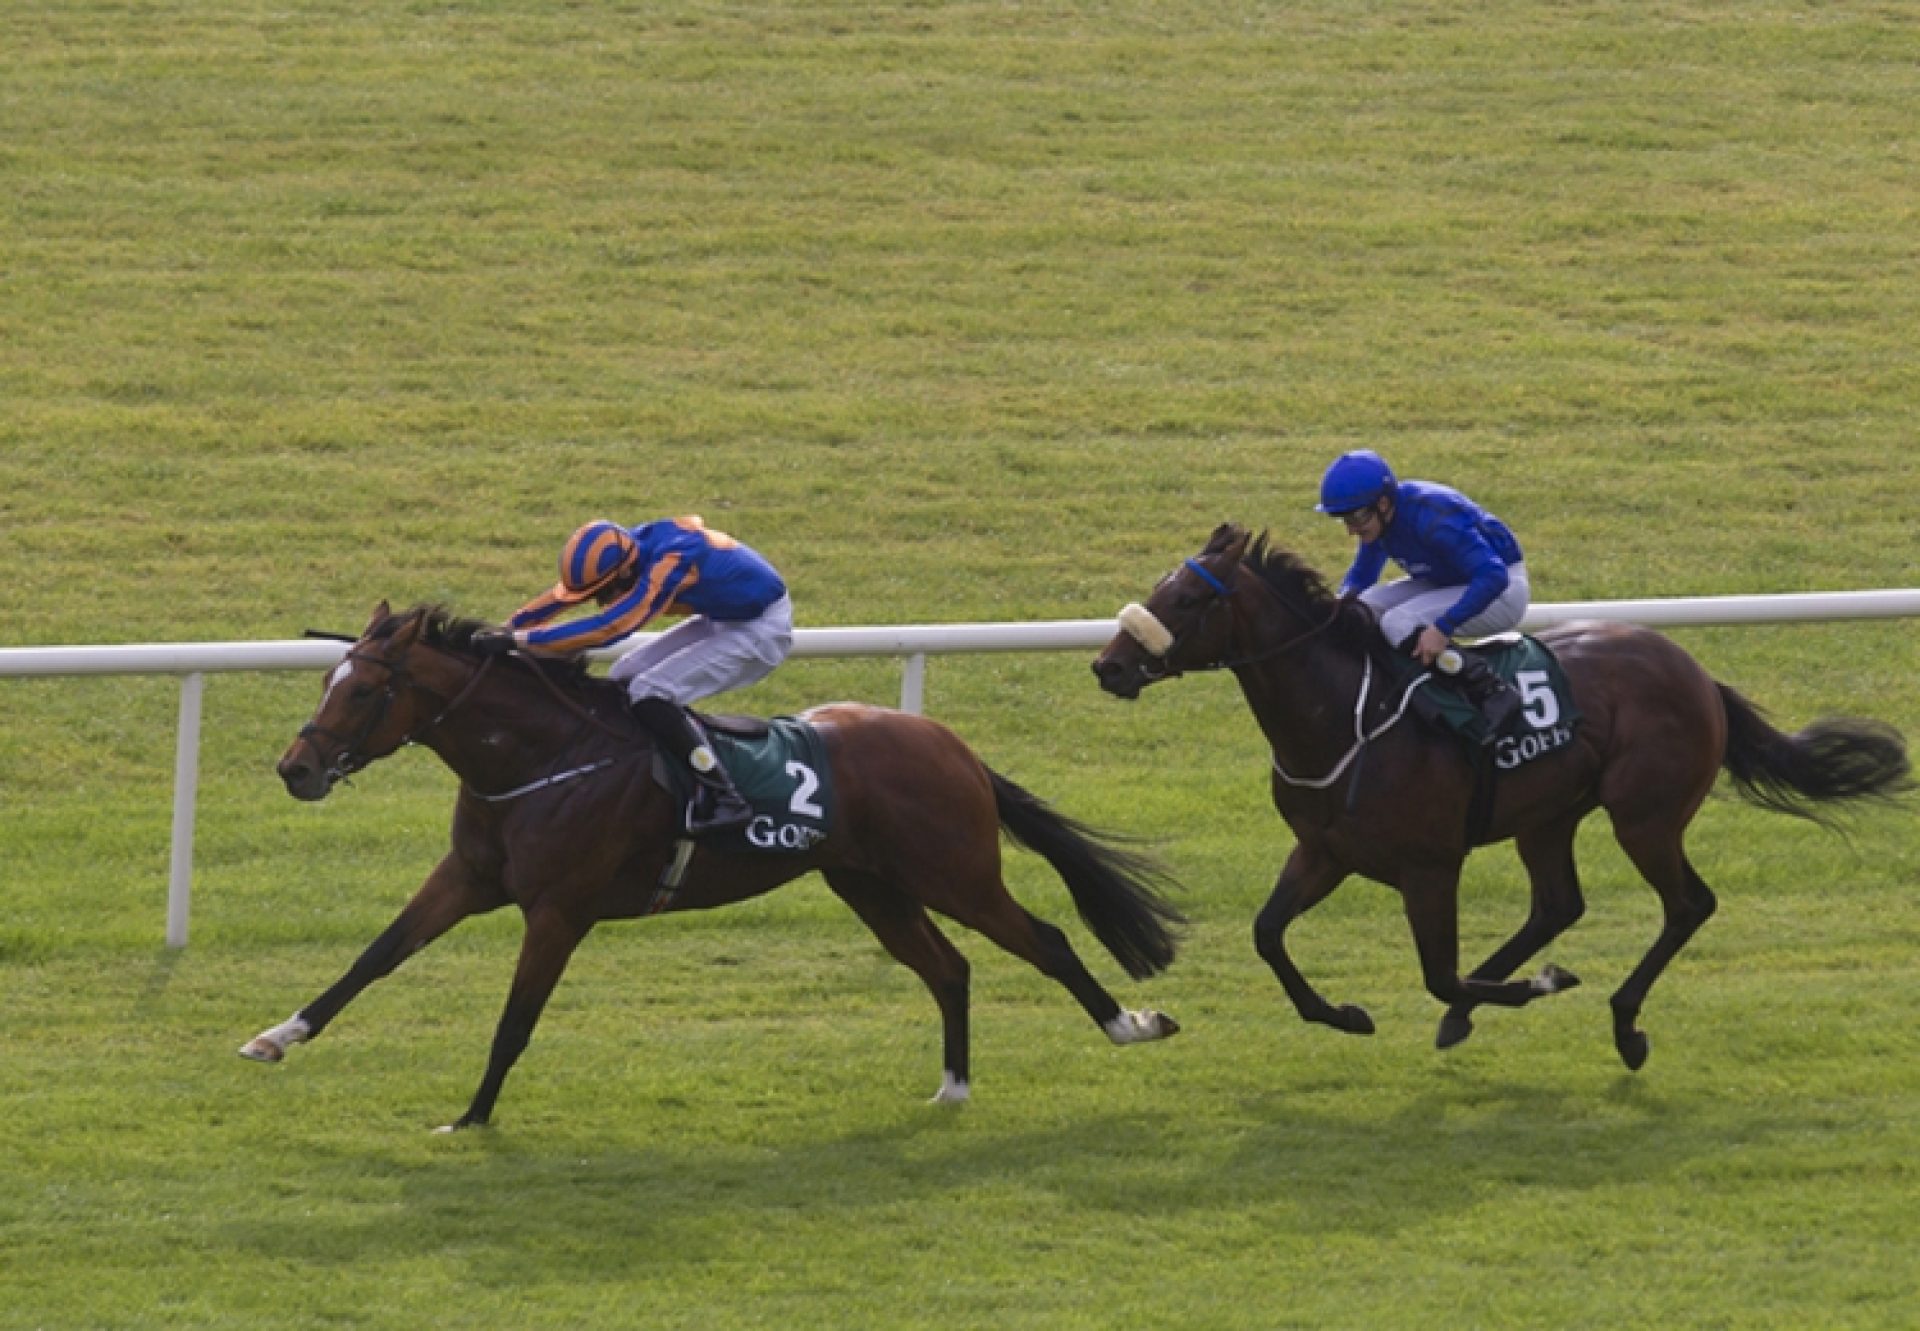 Gleneagles (Galileo) winning the National Stakes at the Curragh